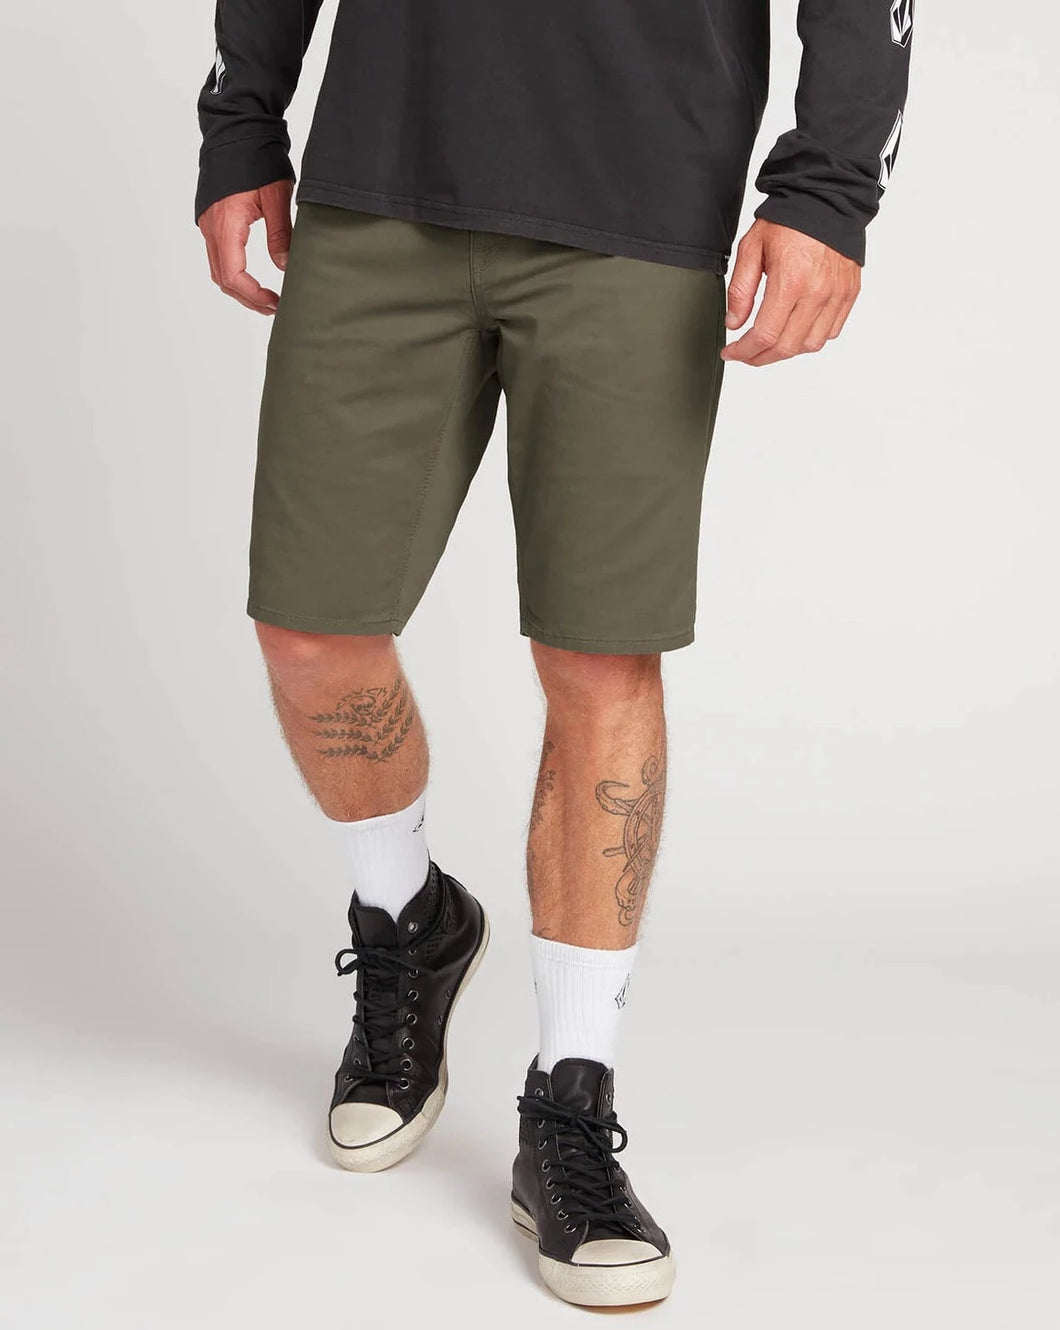 SOLVER LITE 5 POCKET SHORTS - ARMY GREEN COMBO